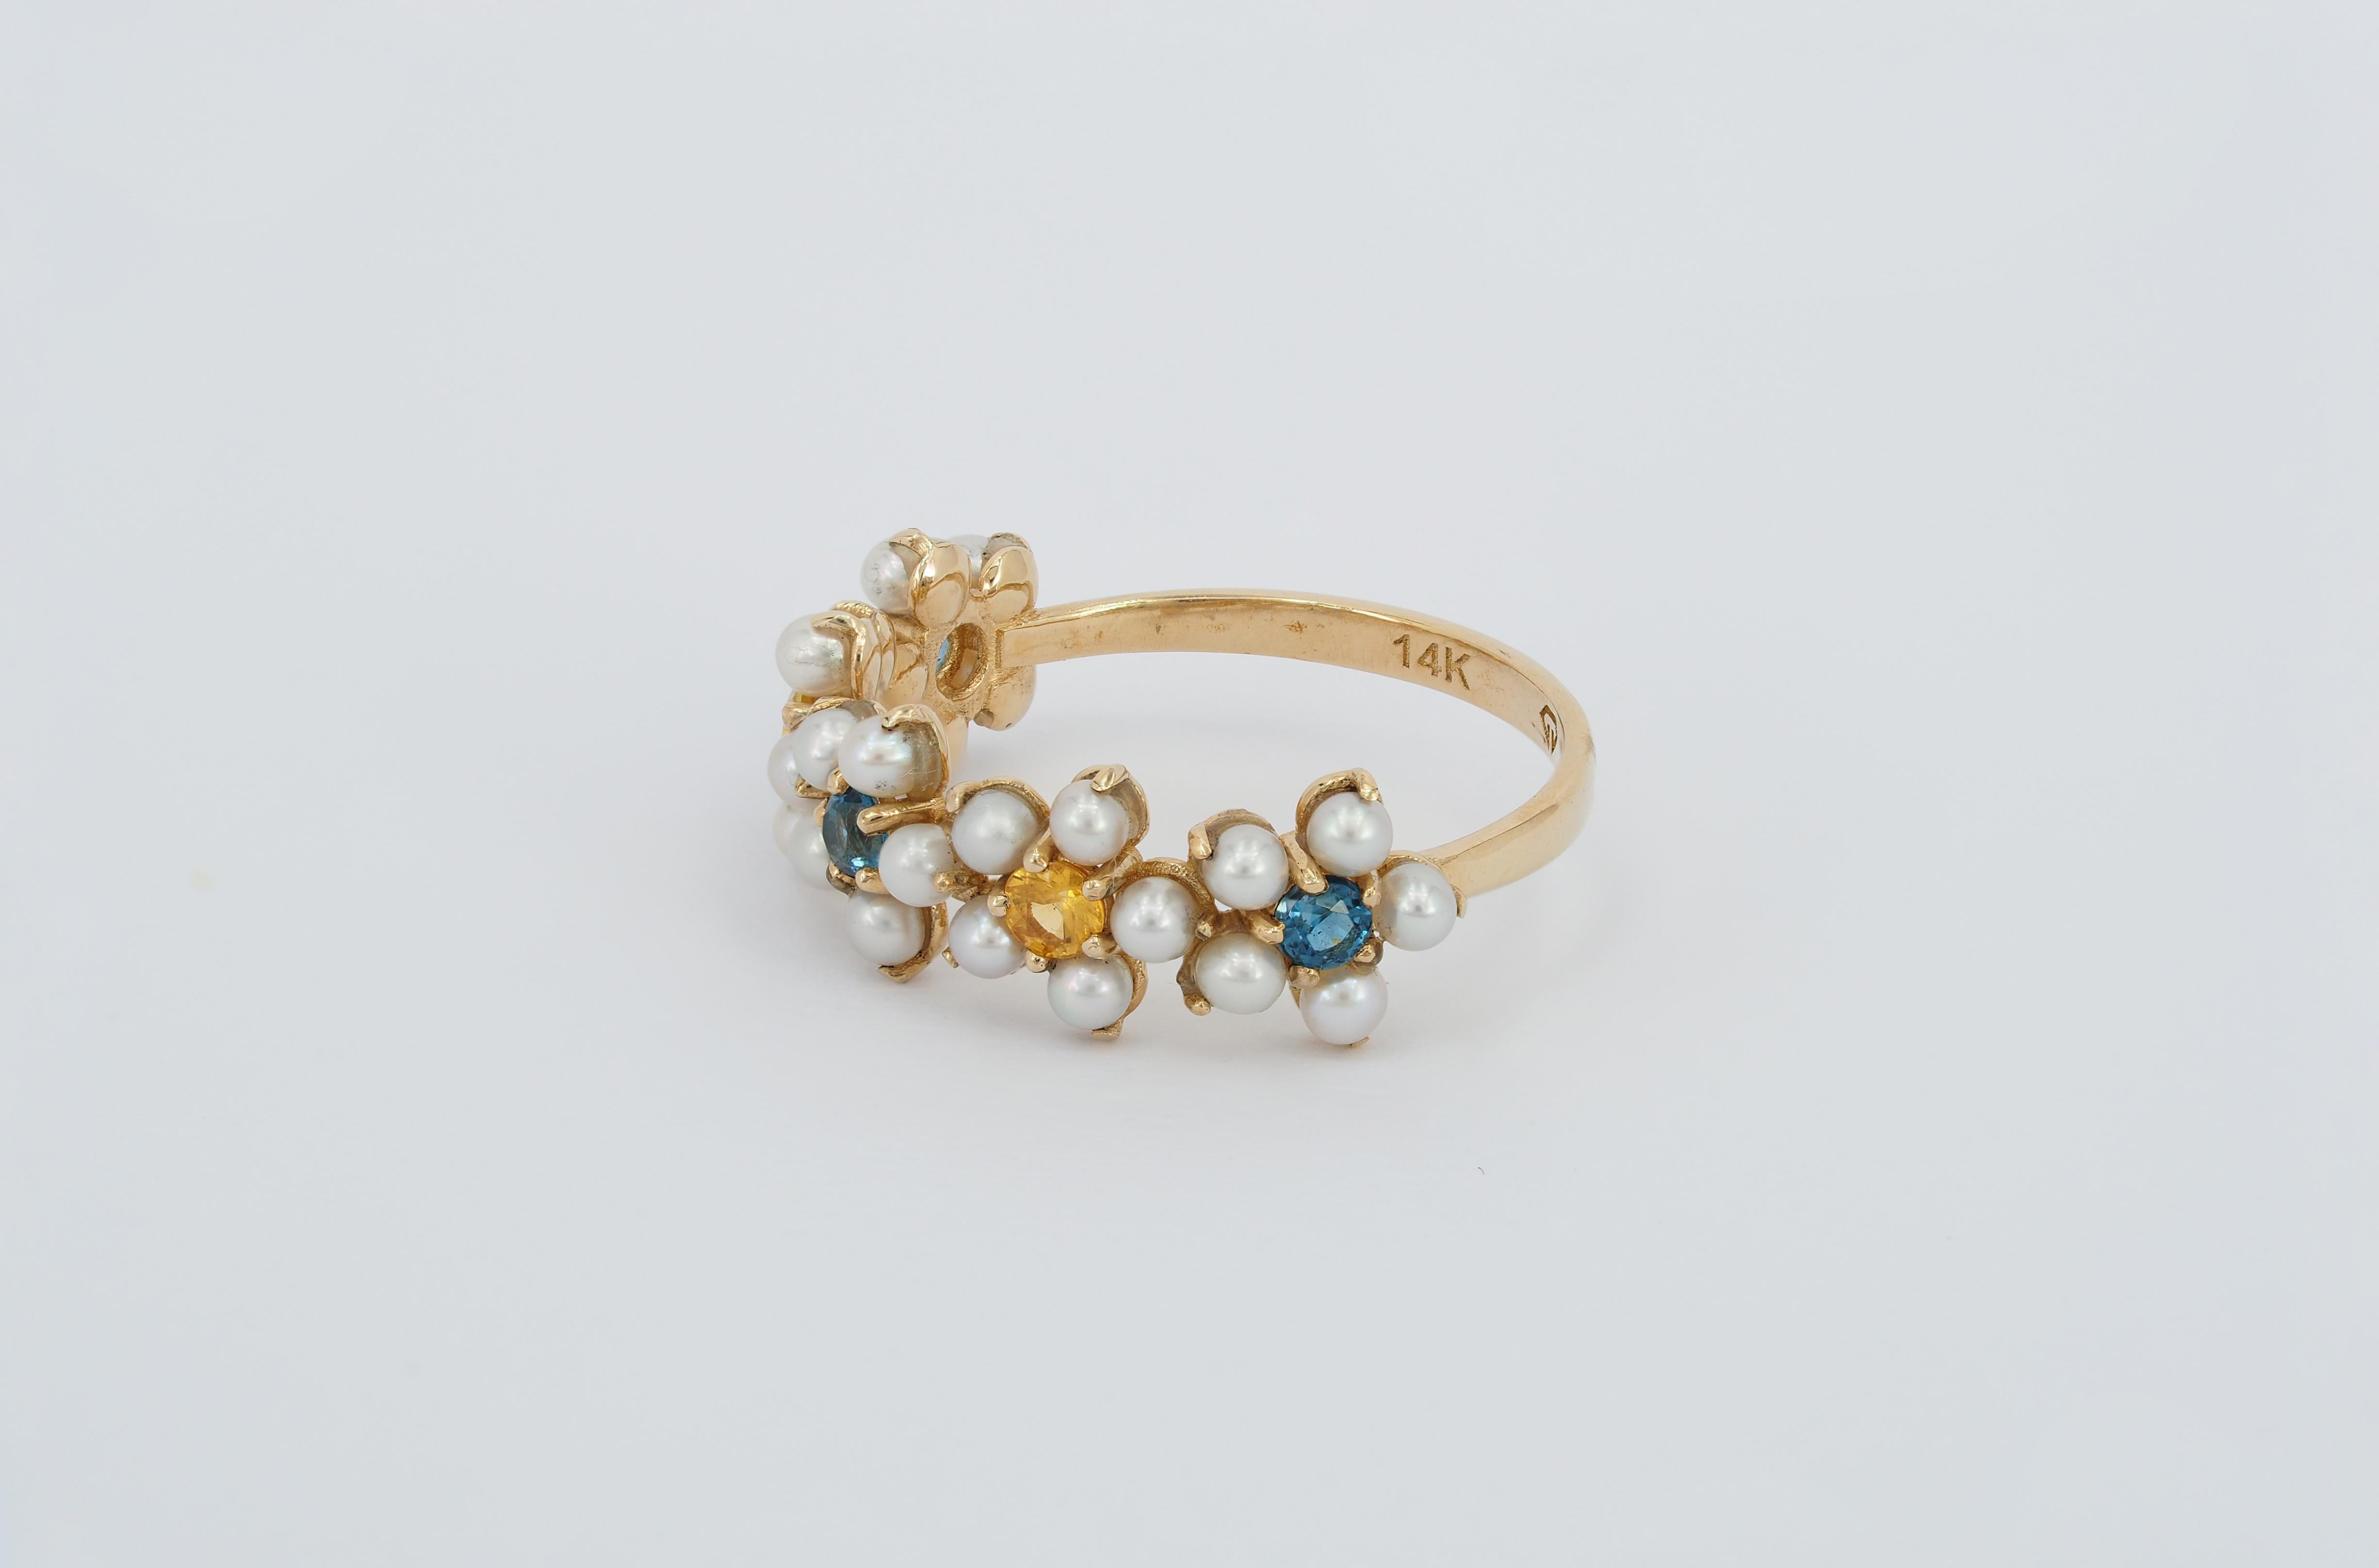 For Sale:  14k Gold Ring with Pearls and Sapphires 4